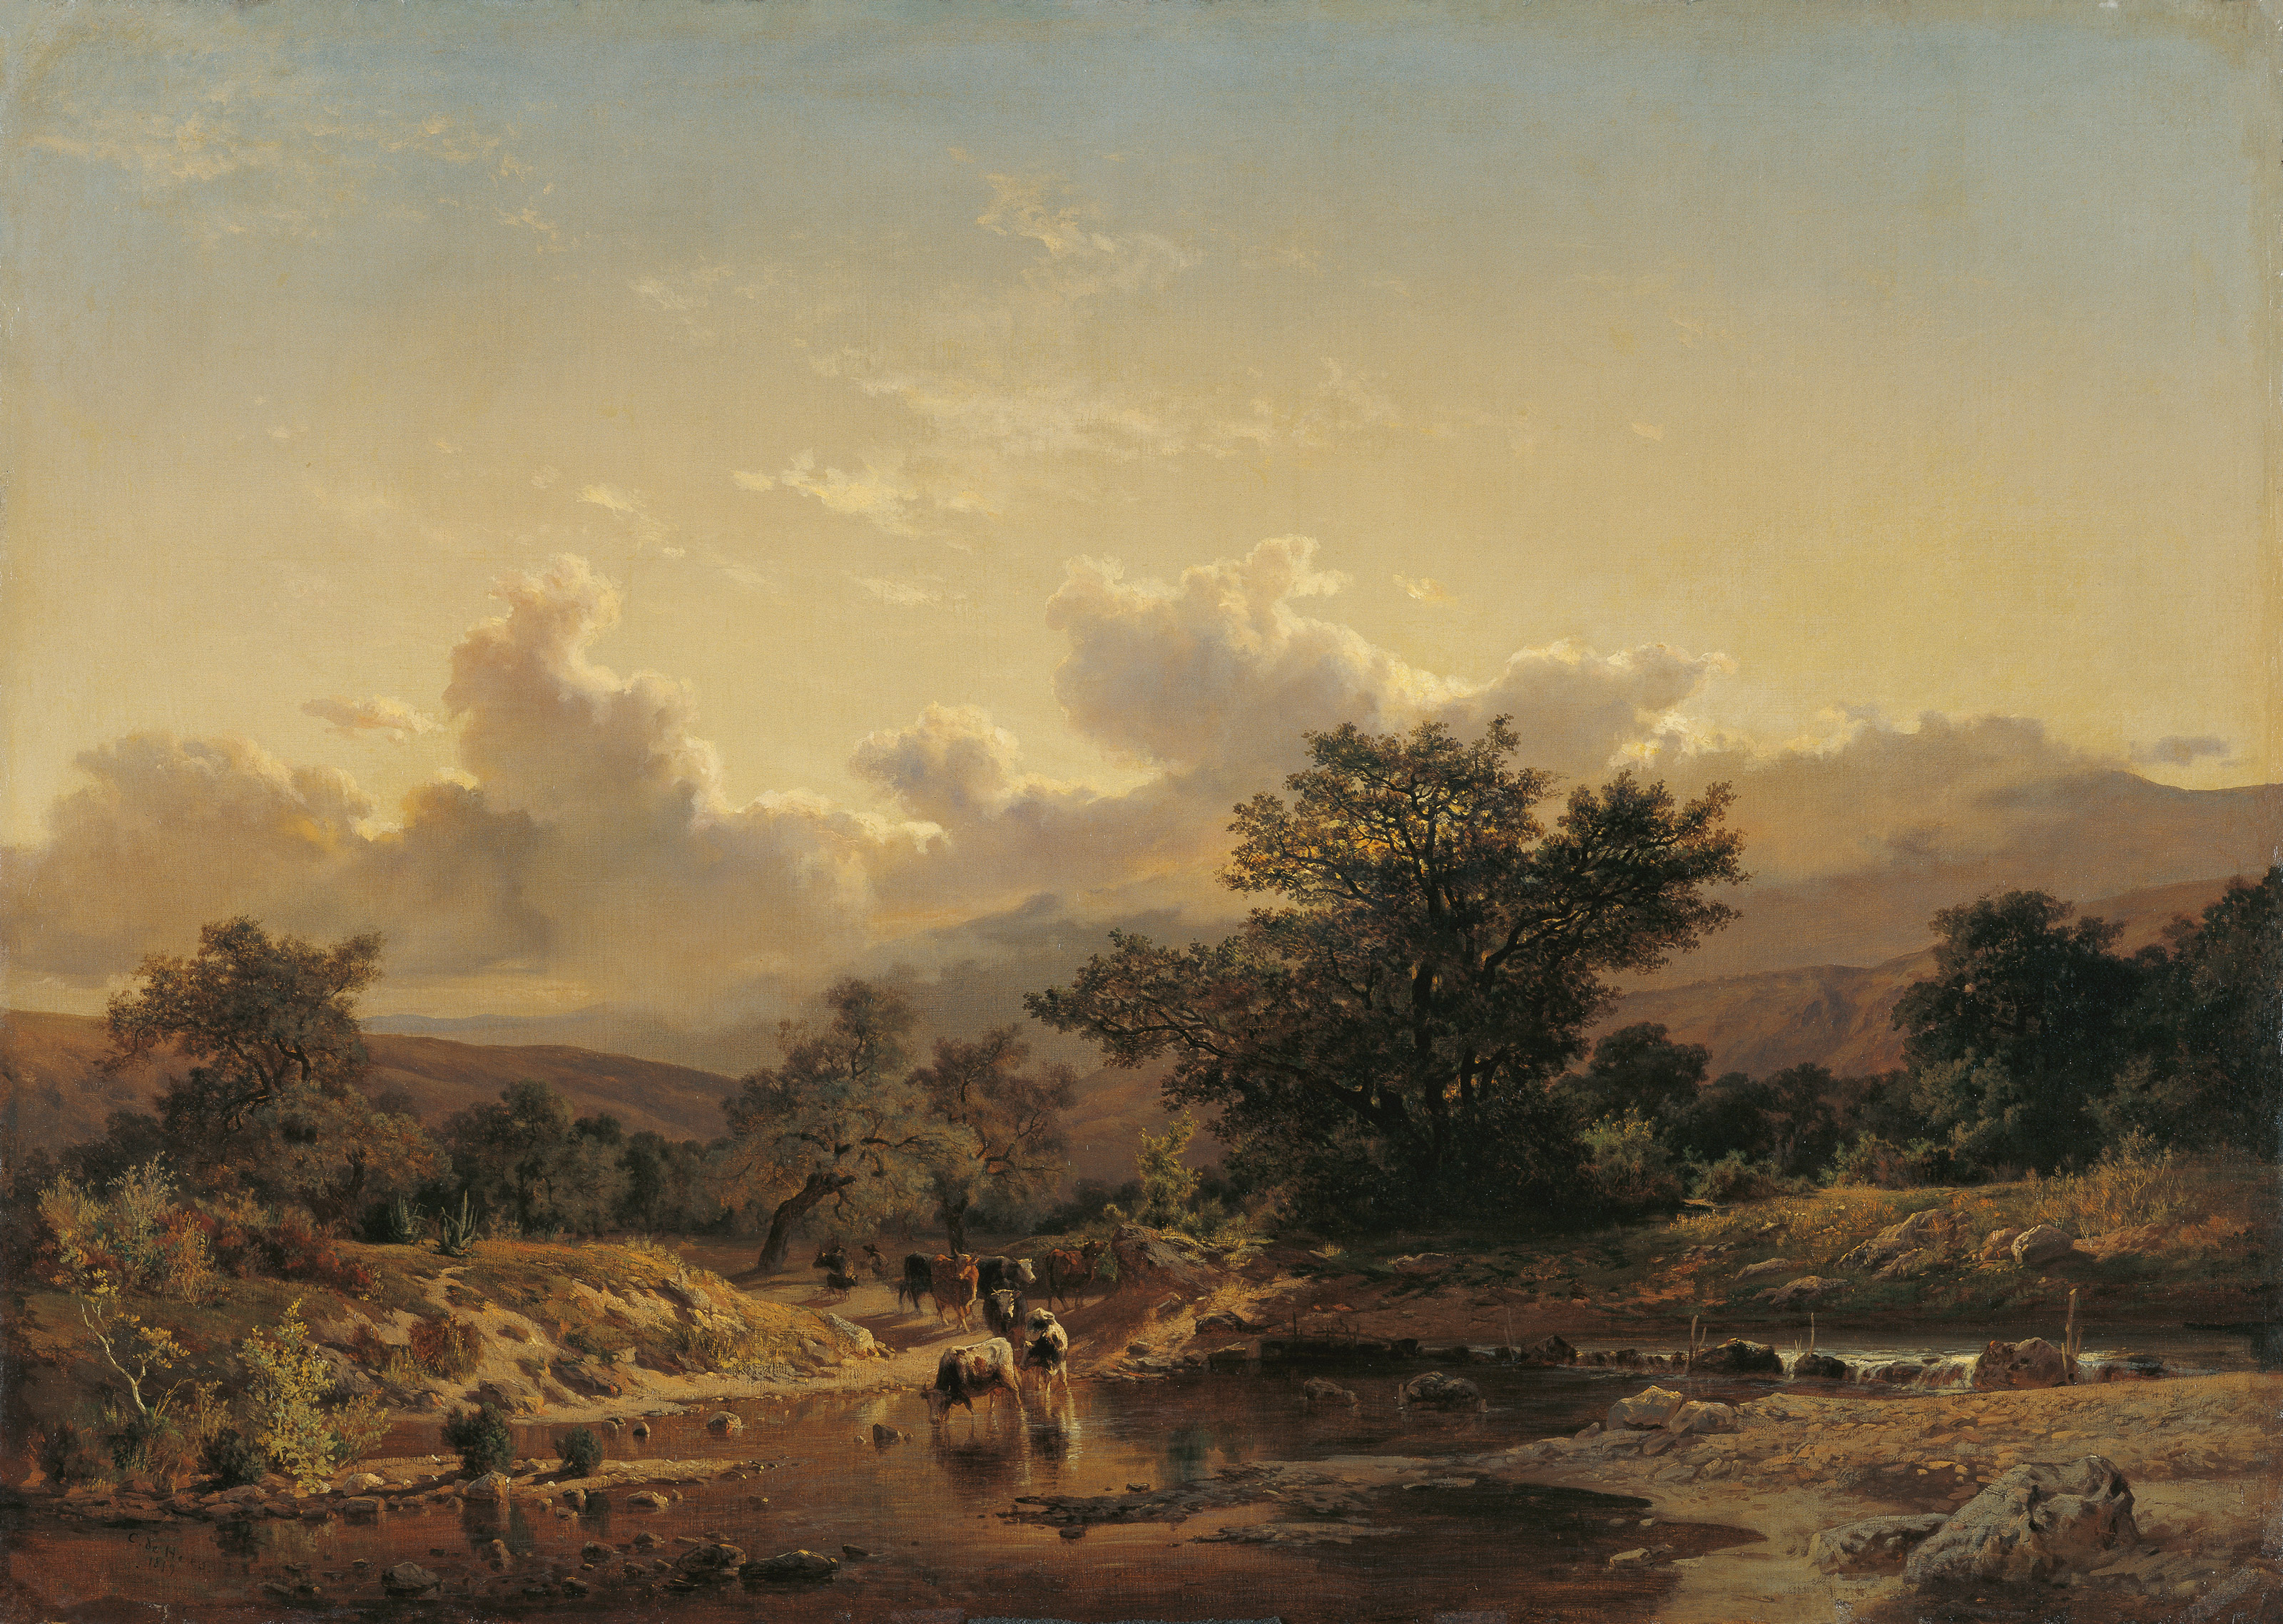 Landscape with Drove of Cows